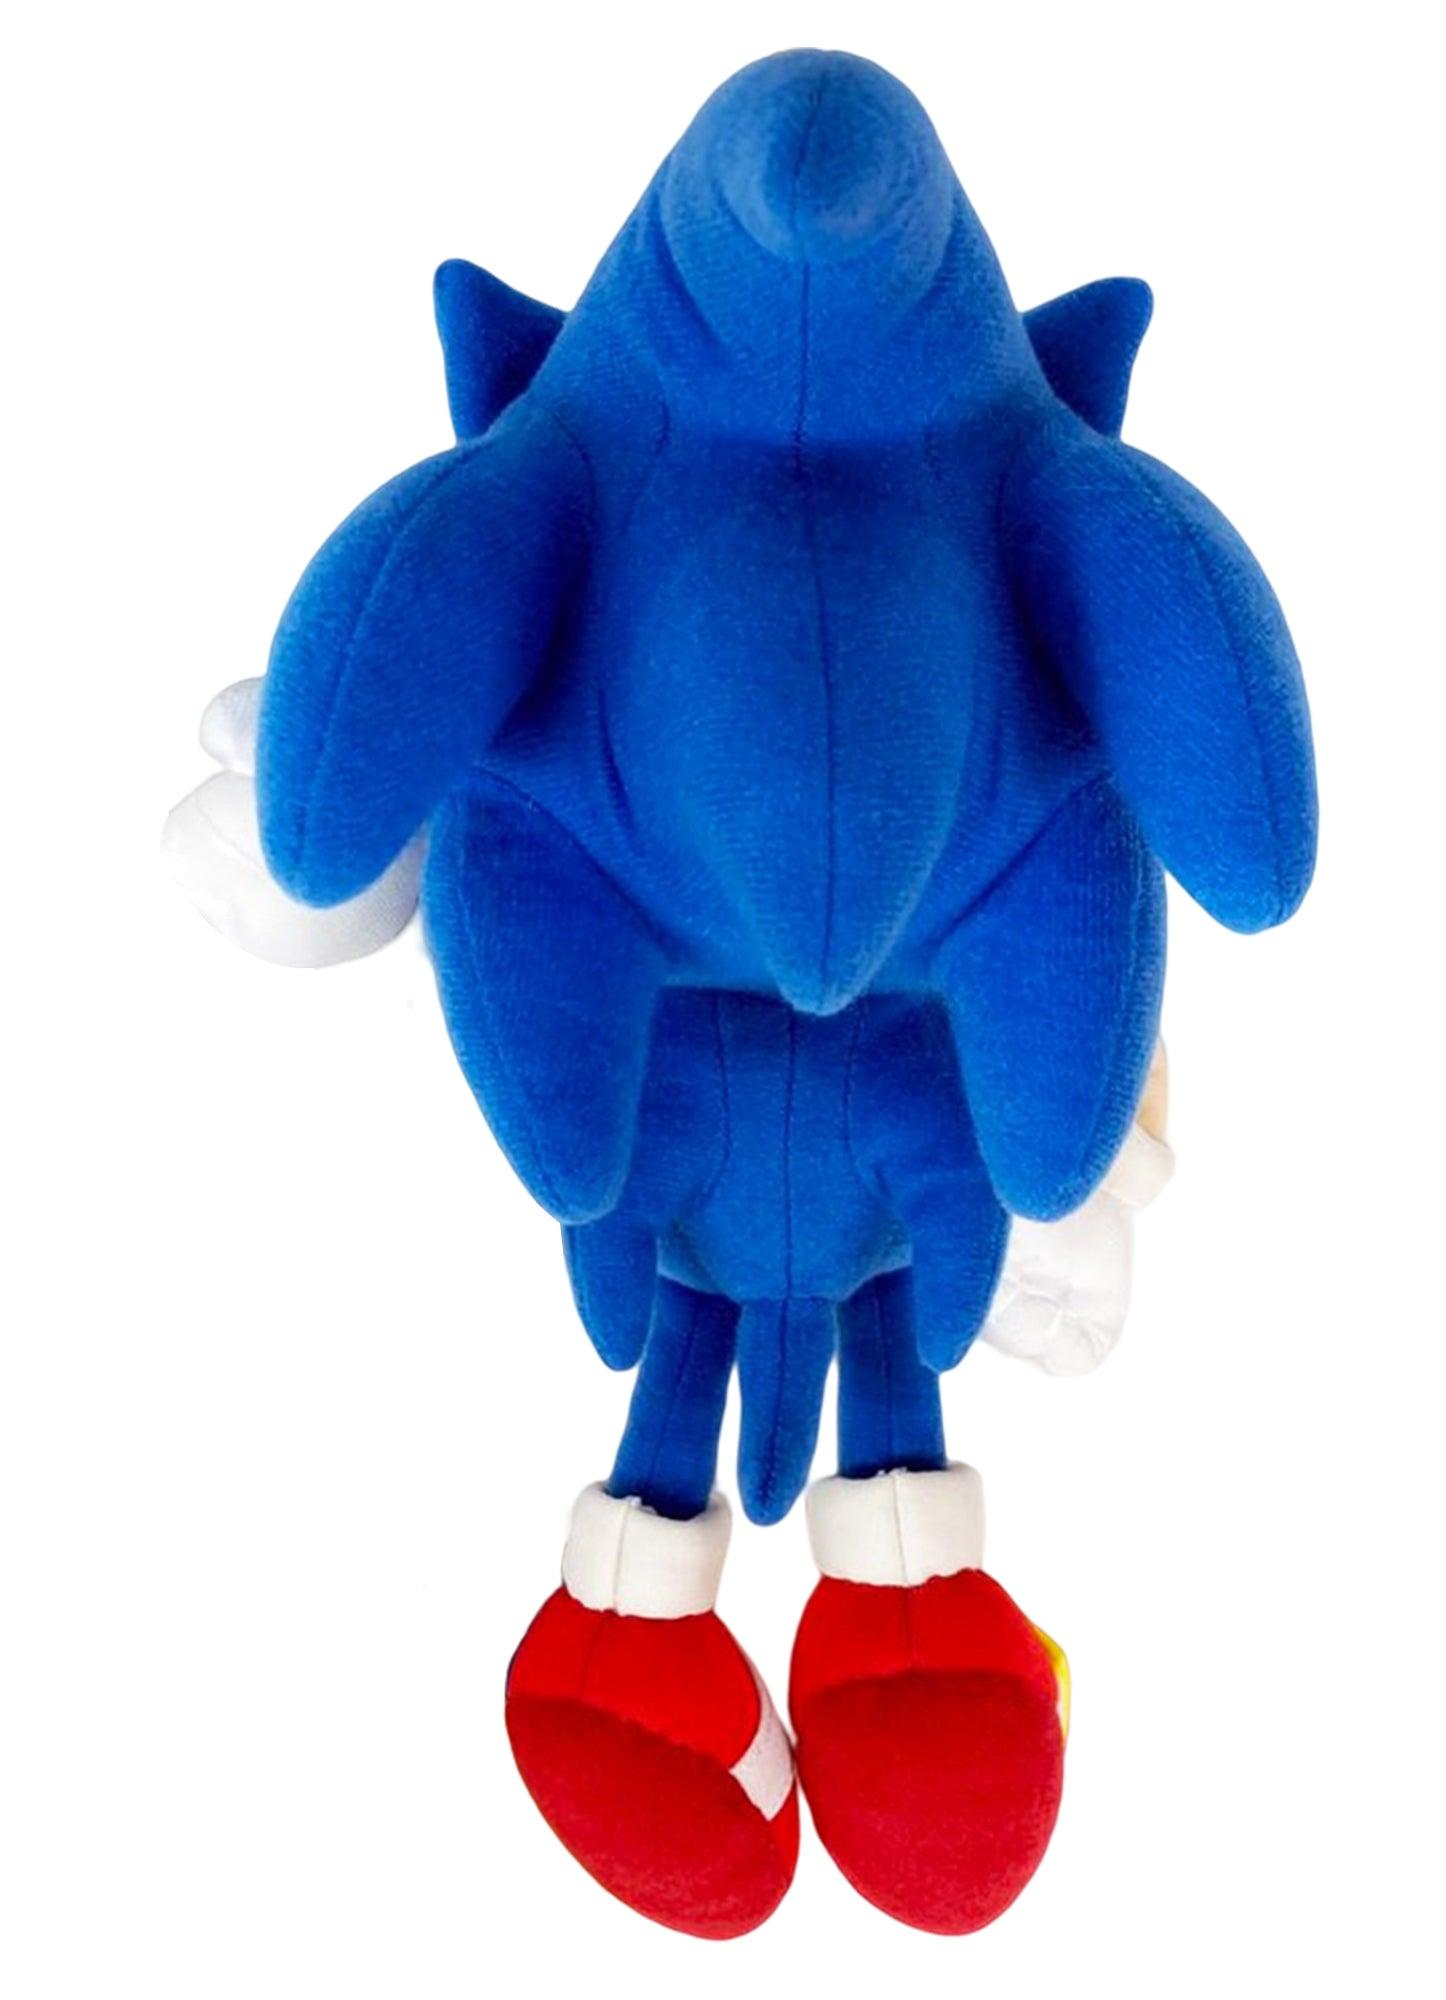 International Classic Sonic Plush - Sonic The Hedgehog Collectibles